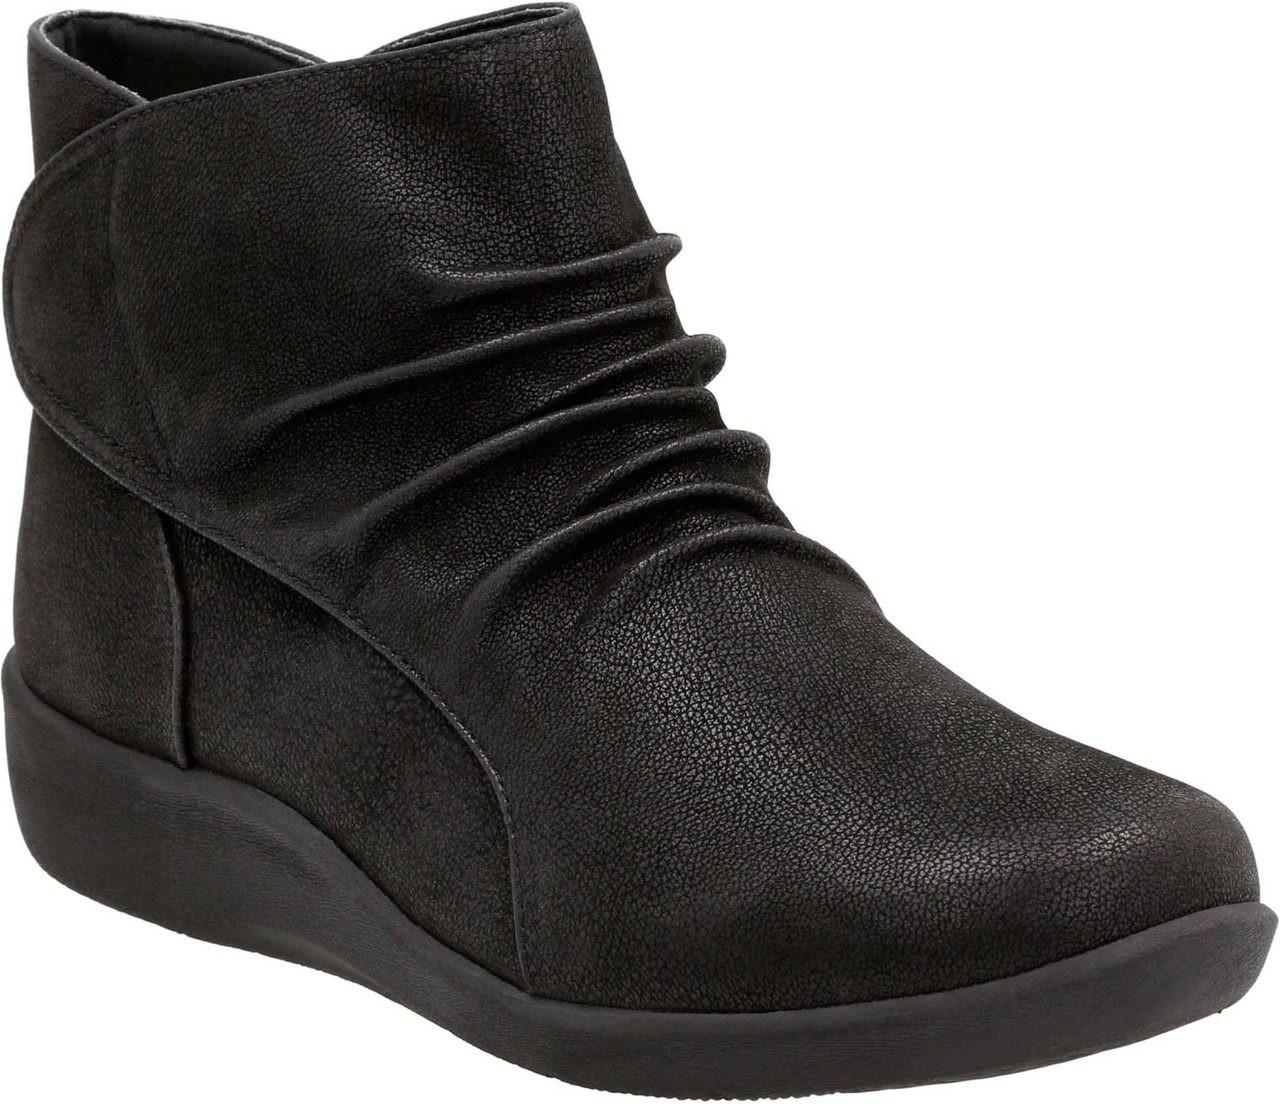 clarks sillian sway boots